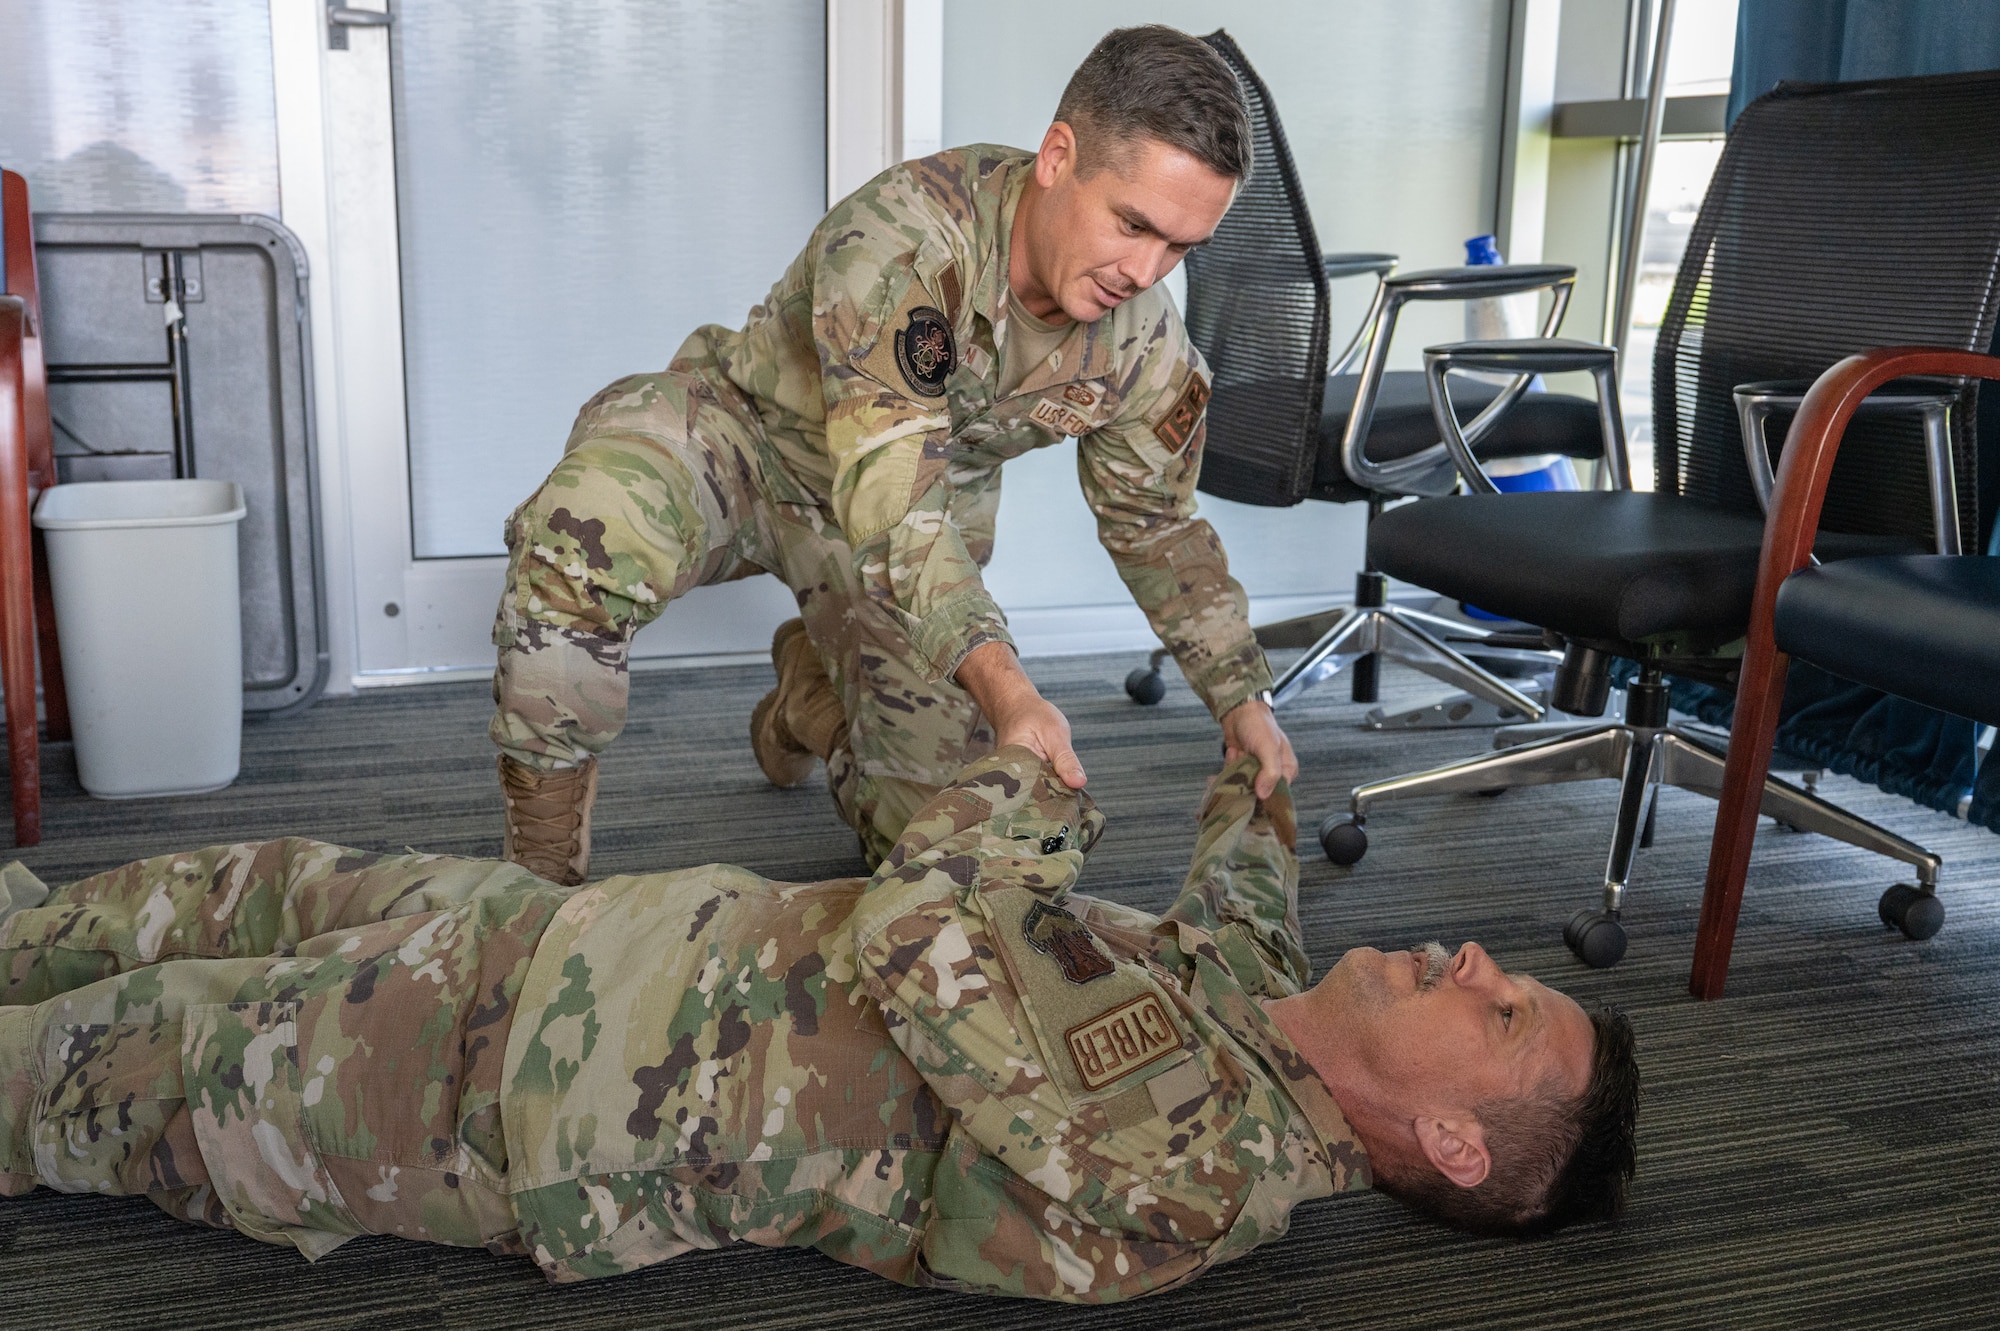 U.S. Air Force Staff Sgt. Layman Franklin, 709th Cyberspace Squadron support center noncommissioned officer in charge, teaches a Tactical Combat Casualty Care class at Patrick Space Force Base, Florida, Aug. 15, 2023. Franklin had his students run through the Massive Bleeding, Airway, Respiration, Circulation, and Hypothermia steps (MARCH) to ensure proper understanding of the protocol. (U.S. Space Force photo by Senior Airman Dakota Raub)